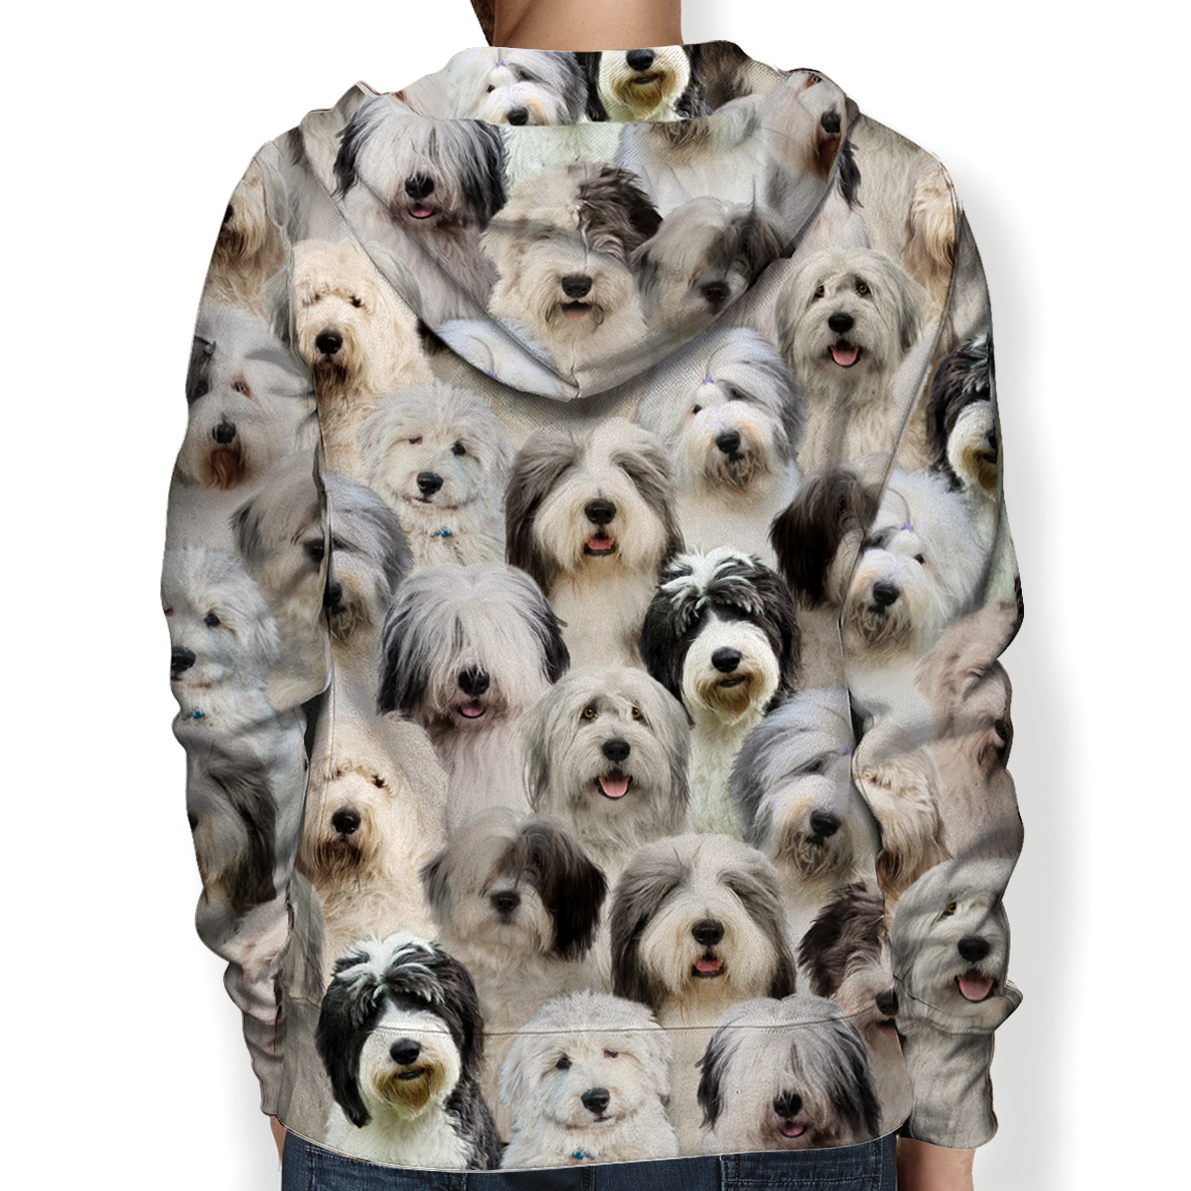 You Will Have A Bunch Of Old English Sheepdogs - Hoodie V1